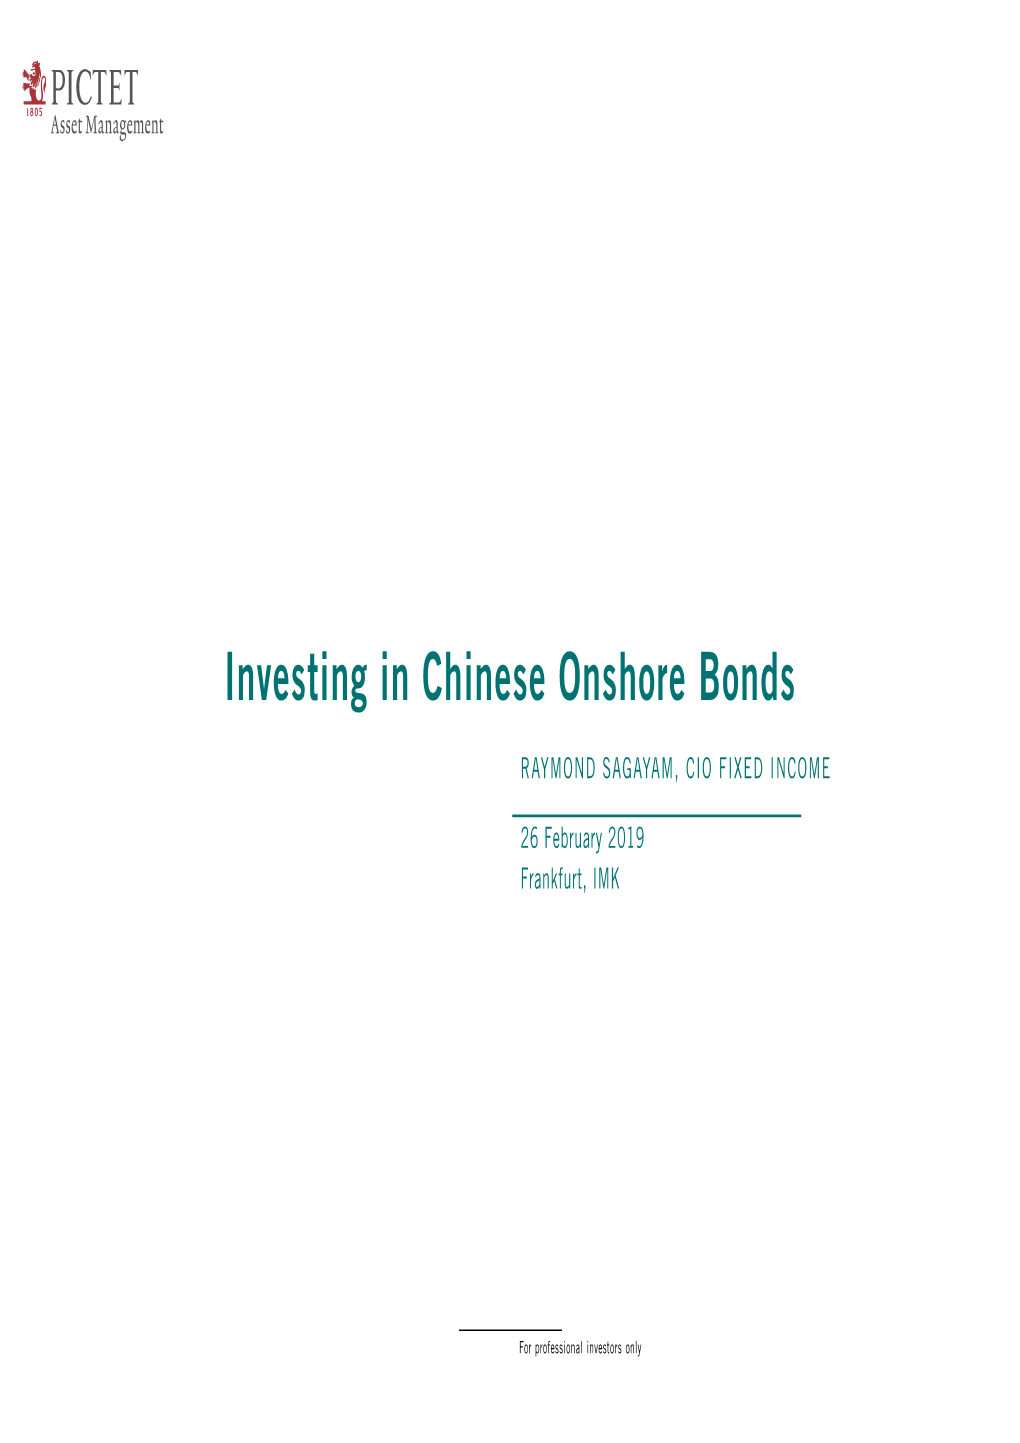 Investing in Chinese Onshore Bonds